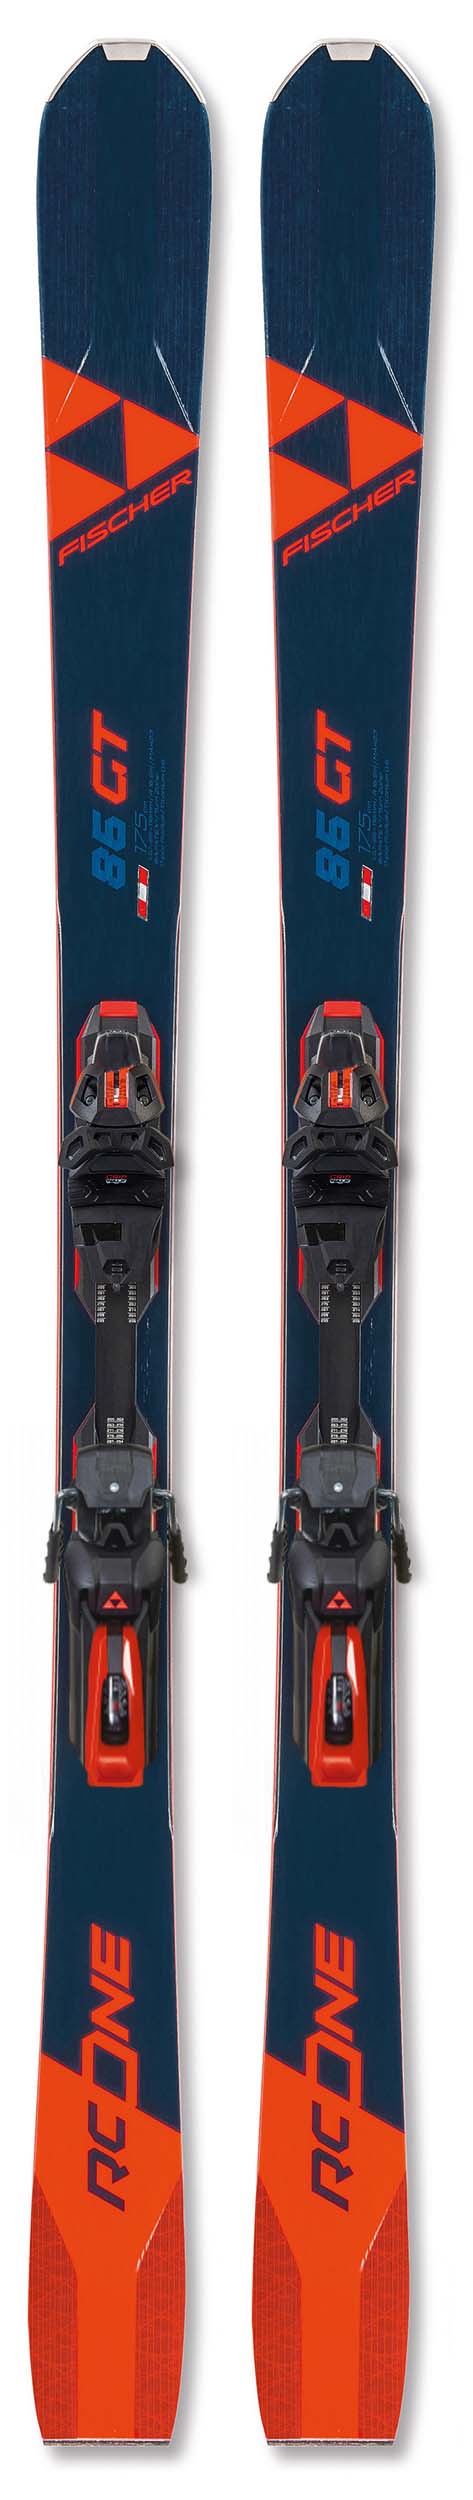 Fischer 2023 RC One 86 GT Skis w/Protector 13 Bindings NEW !! 168,175,182cm